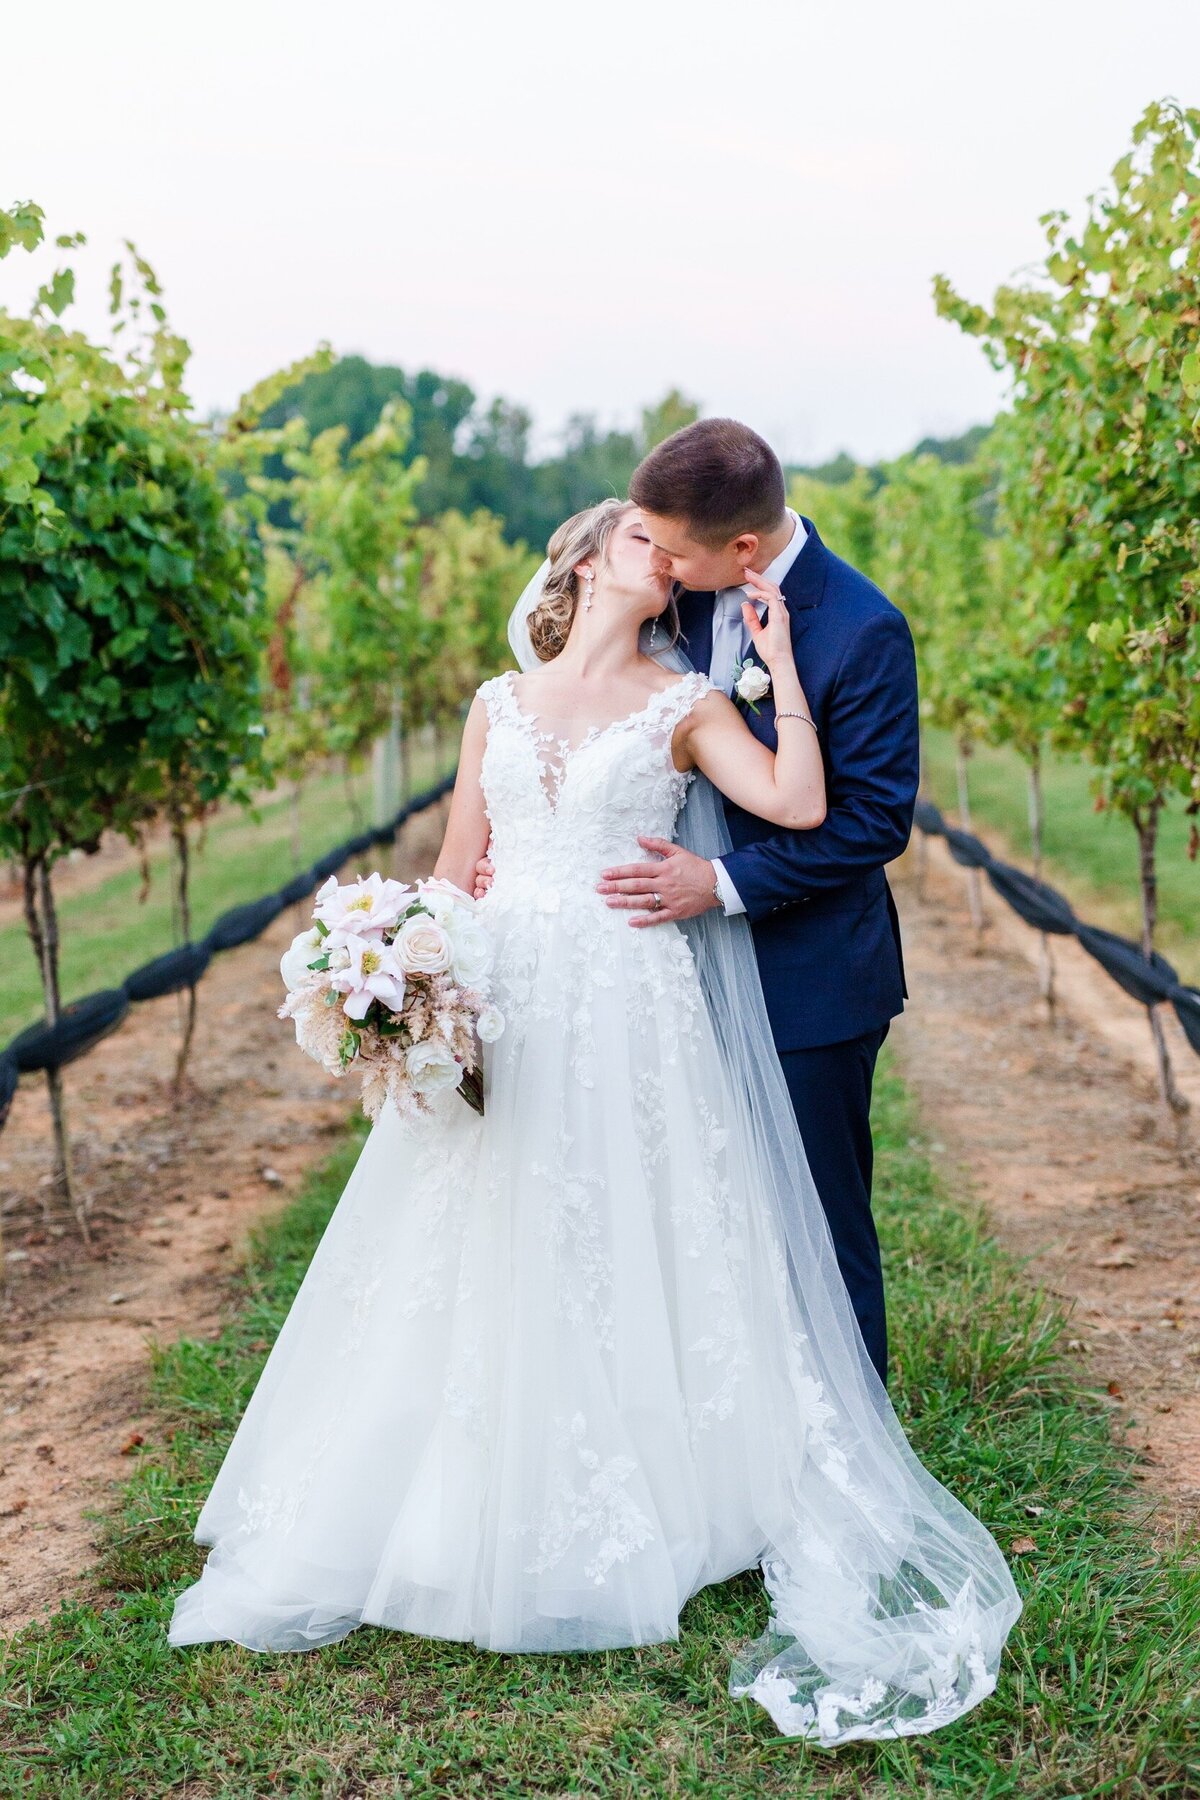 A bride leans back to kiss her groom while they stand in a vineyard row at Childress Vineyards near Charlotte, NC.